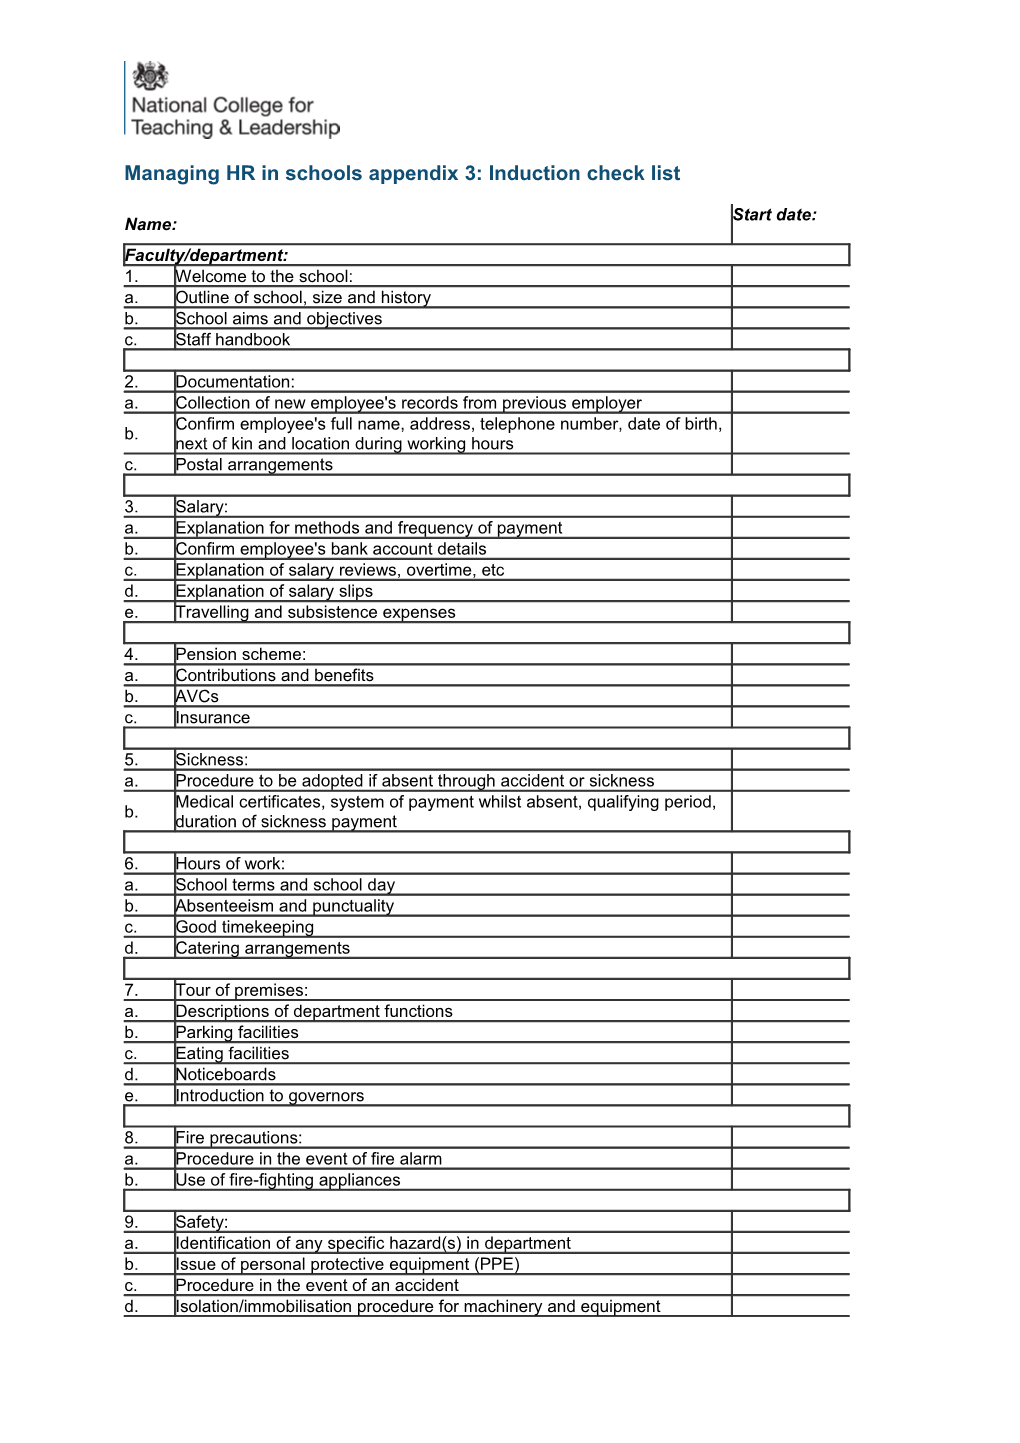 Managing HR in Schools Appendix 3: Induction Check List